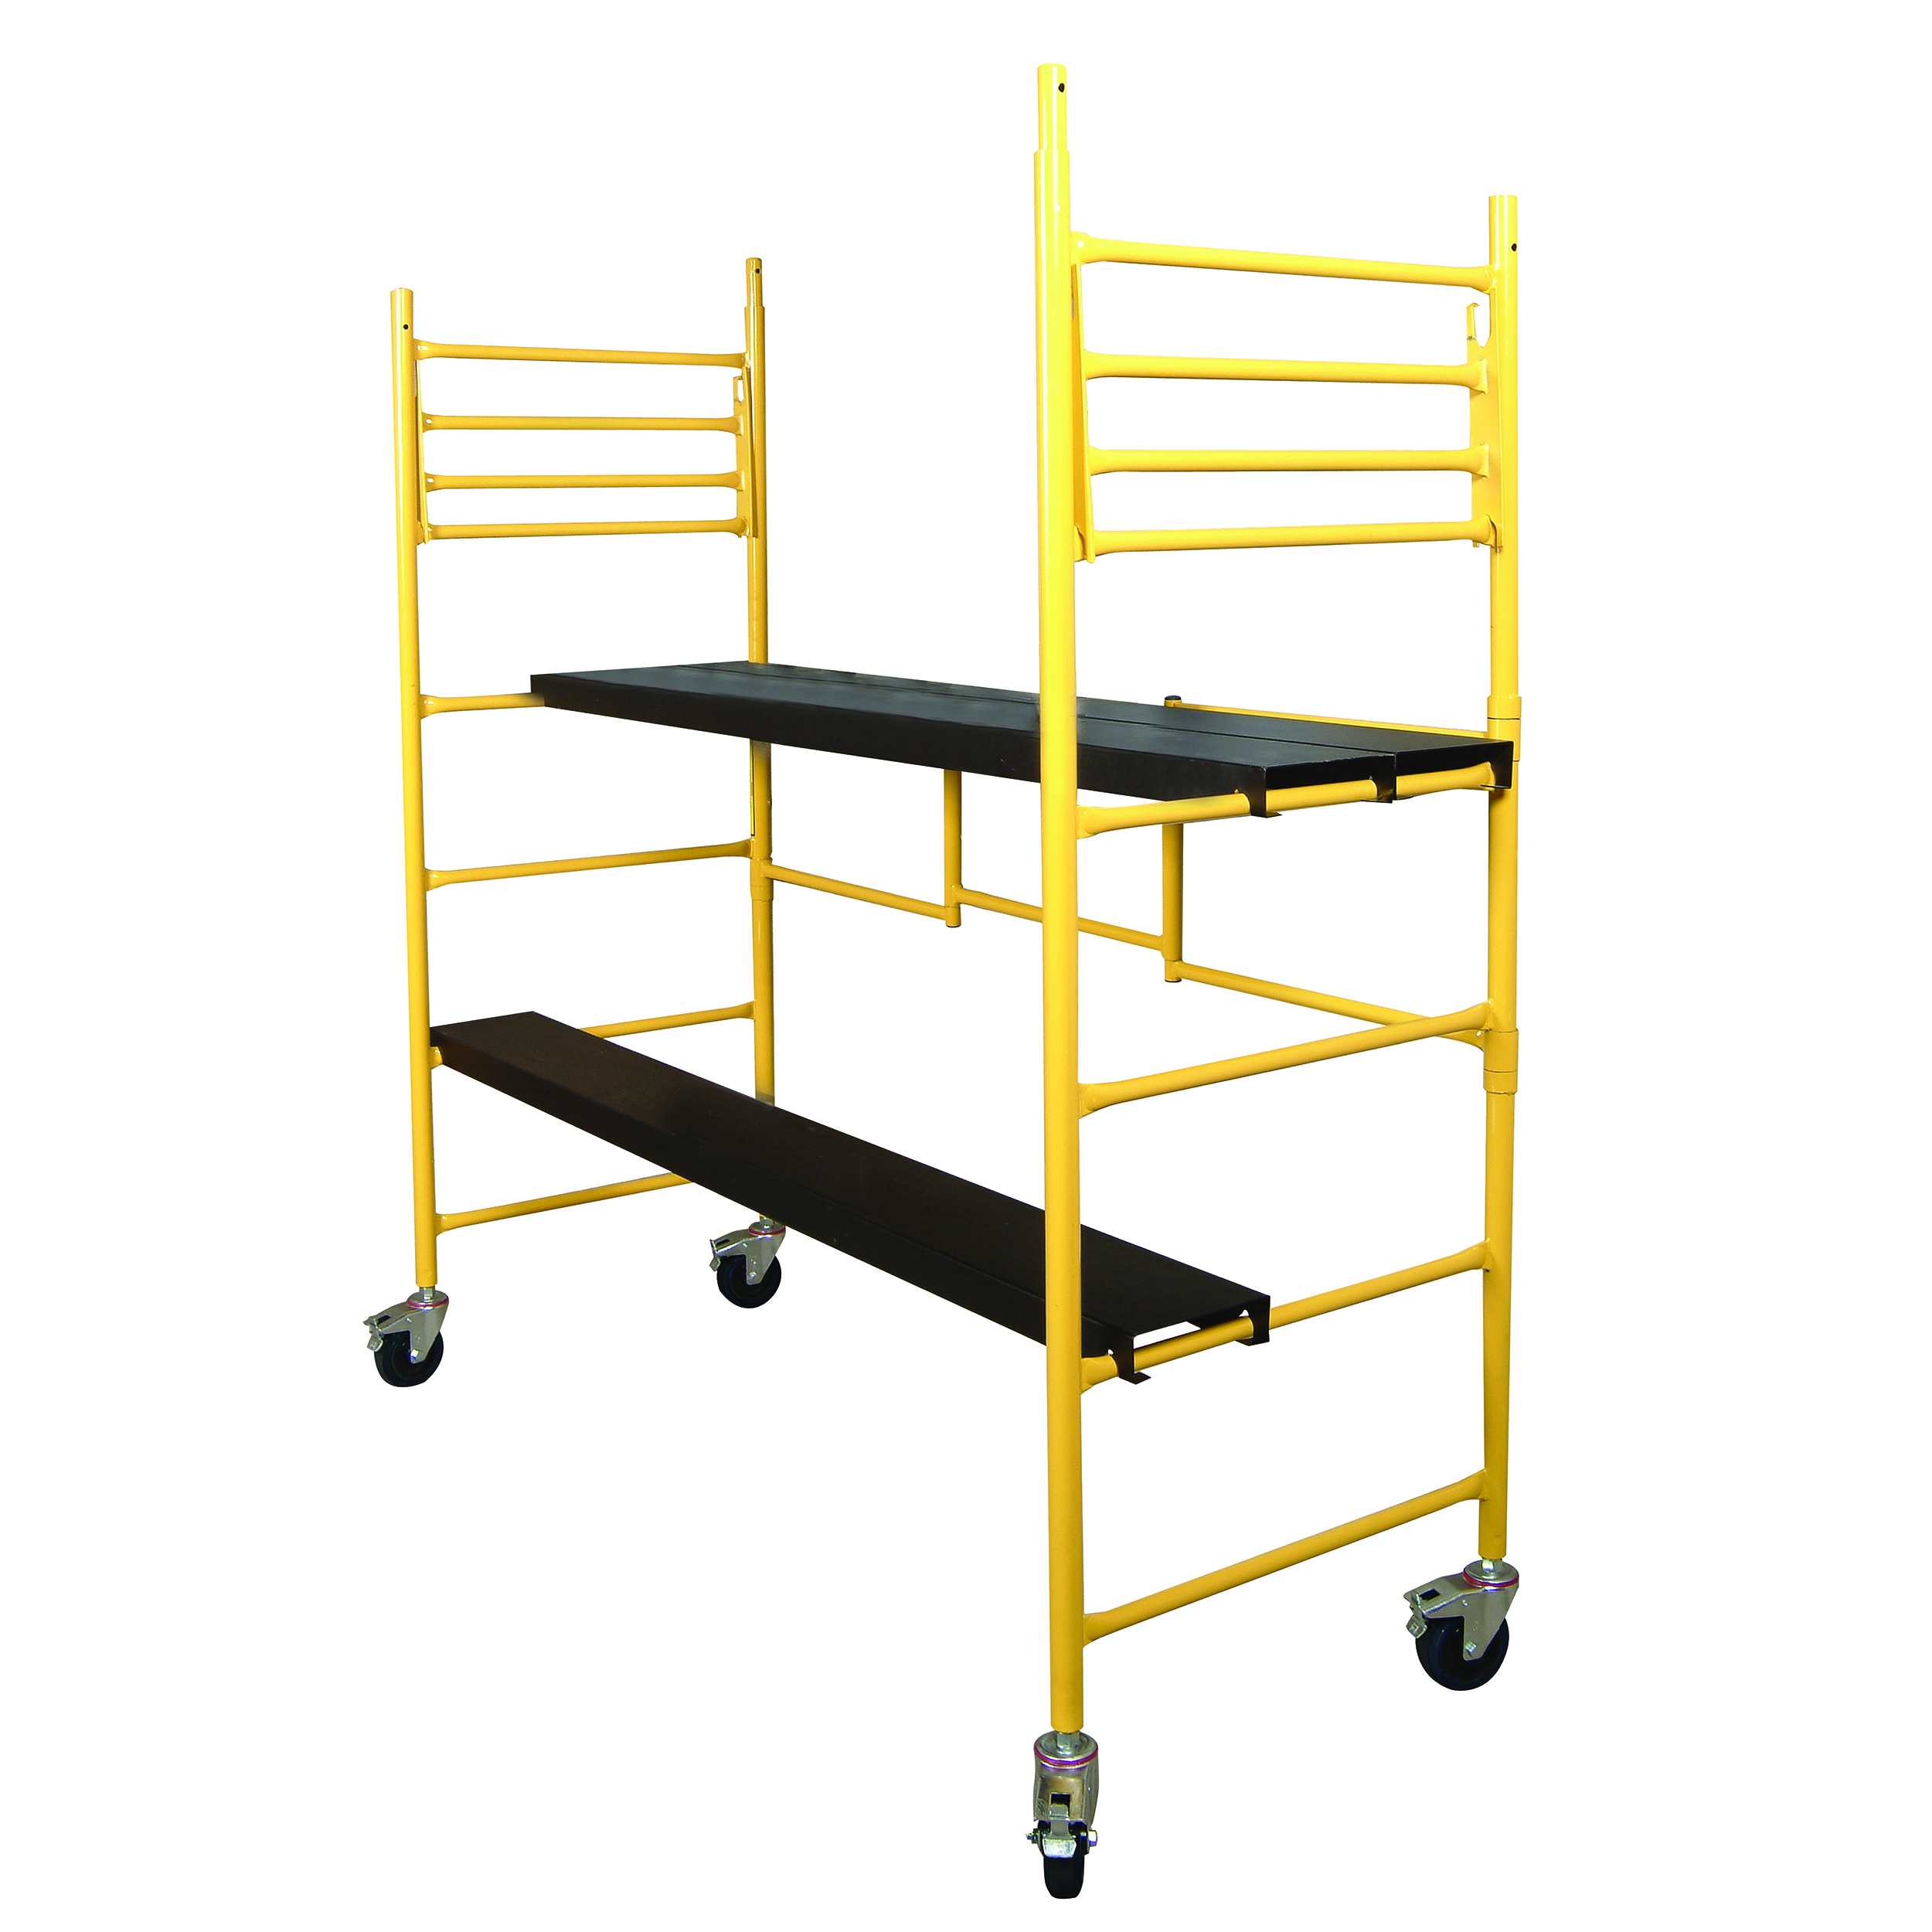 6 Foot Maxi Round Mobile Work Scaffold, Model I-irc